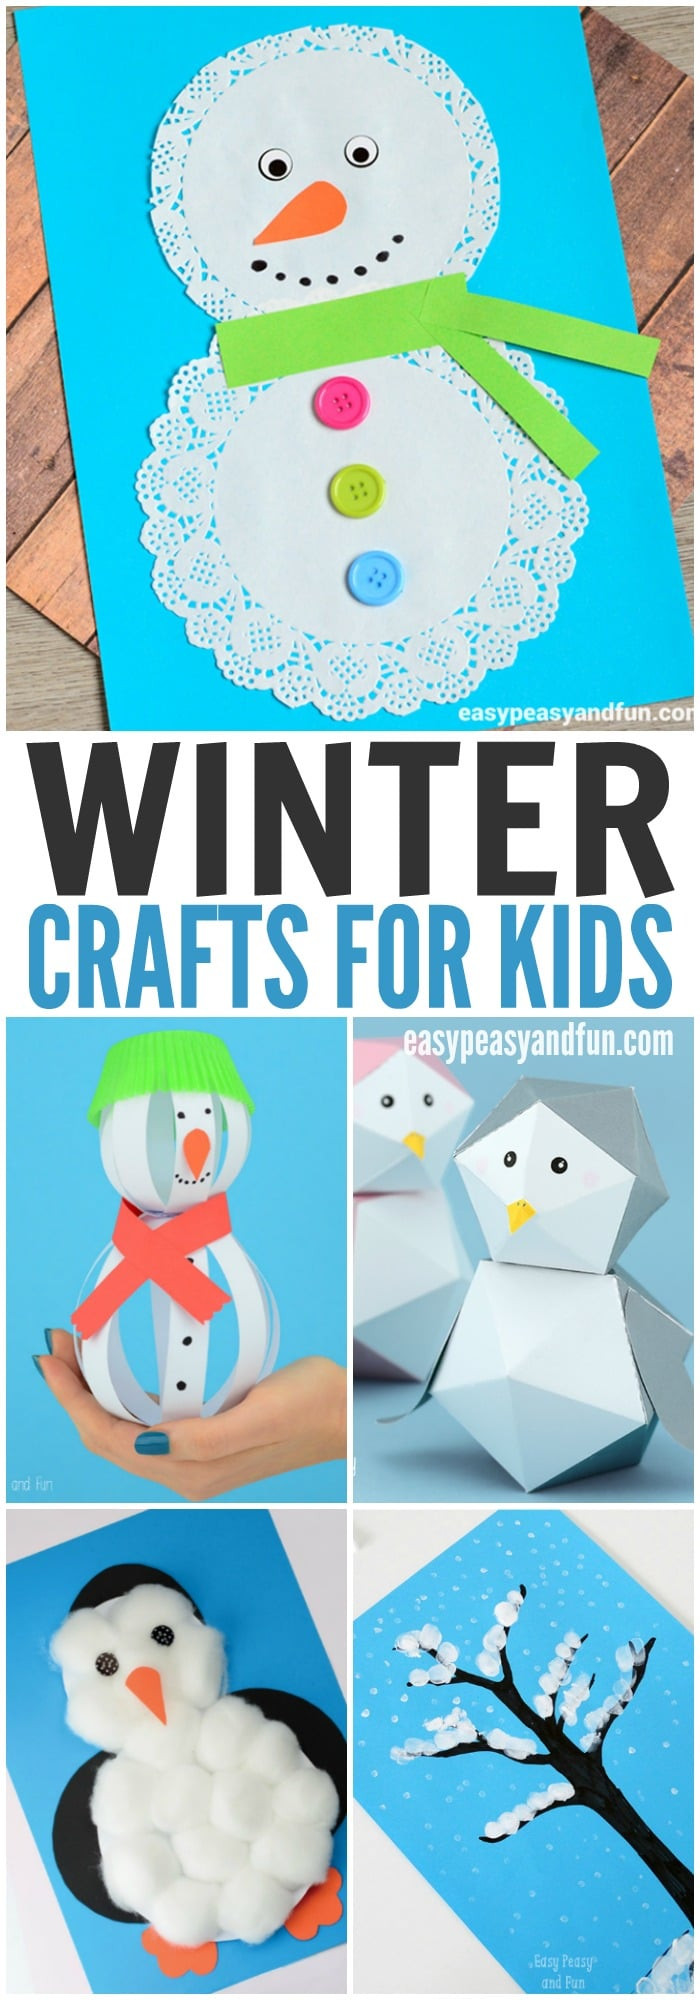 Winter Arts And Crafts For Toddlers
 Winter Crafts for Kids to Make Fun Art and Craft Ideas